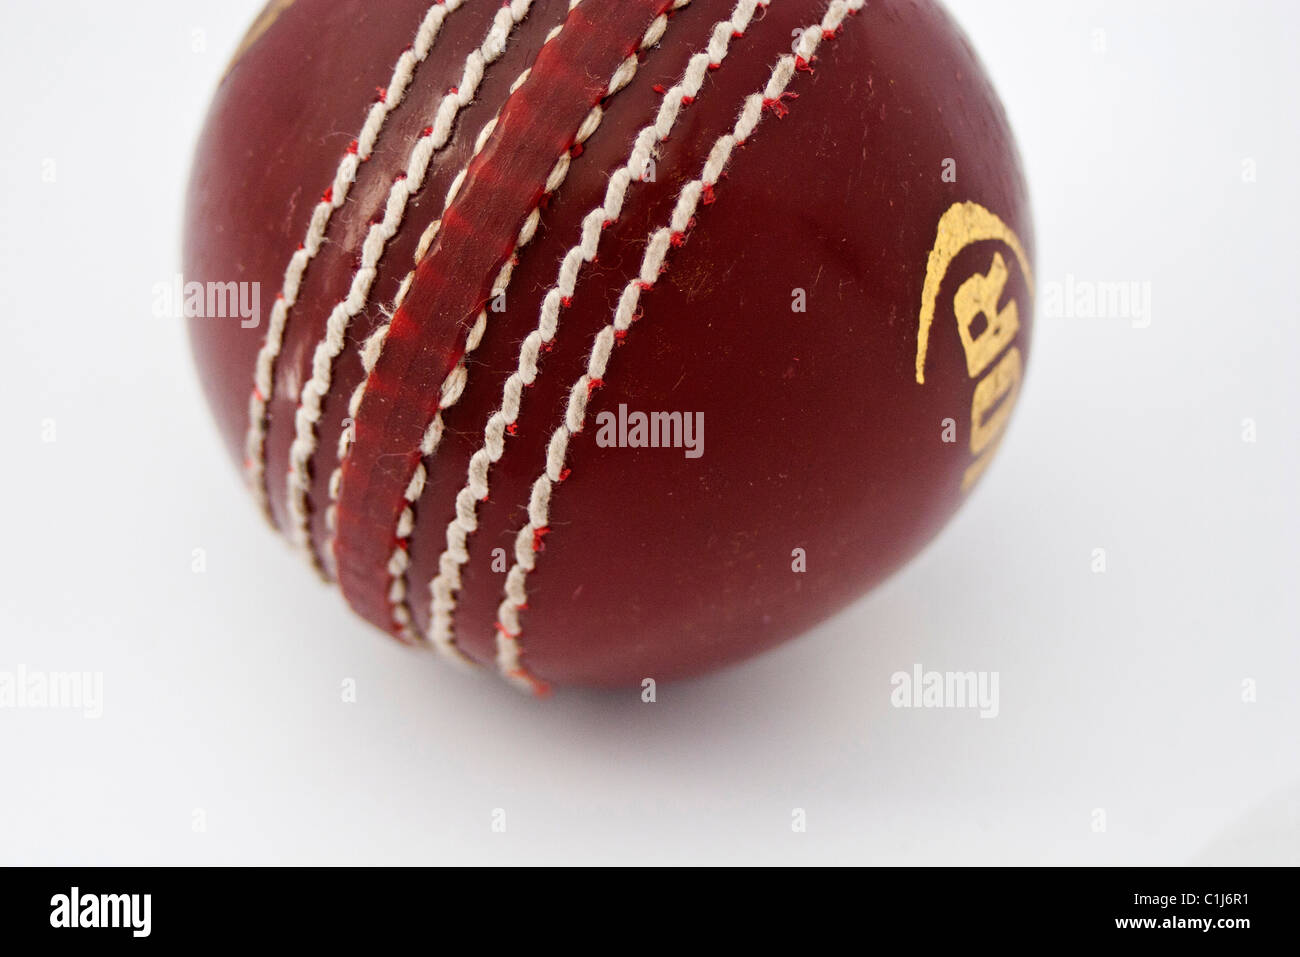 a cropped shot of a dark red cricket ball against clean white background Stock Photo